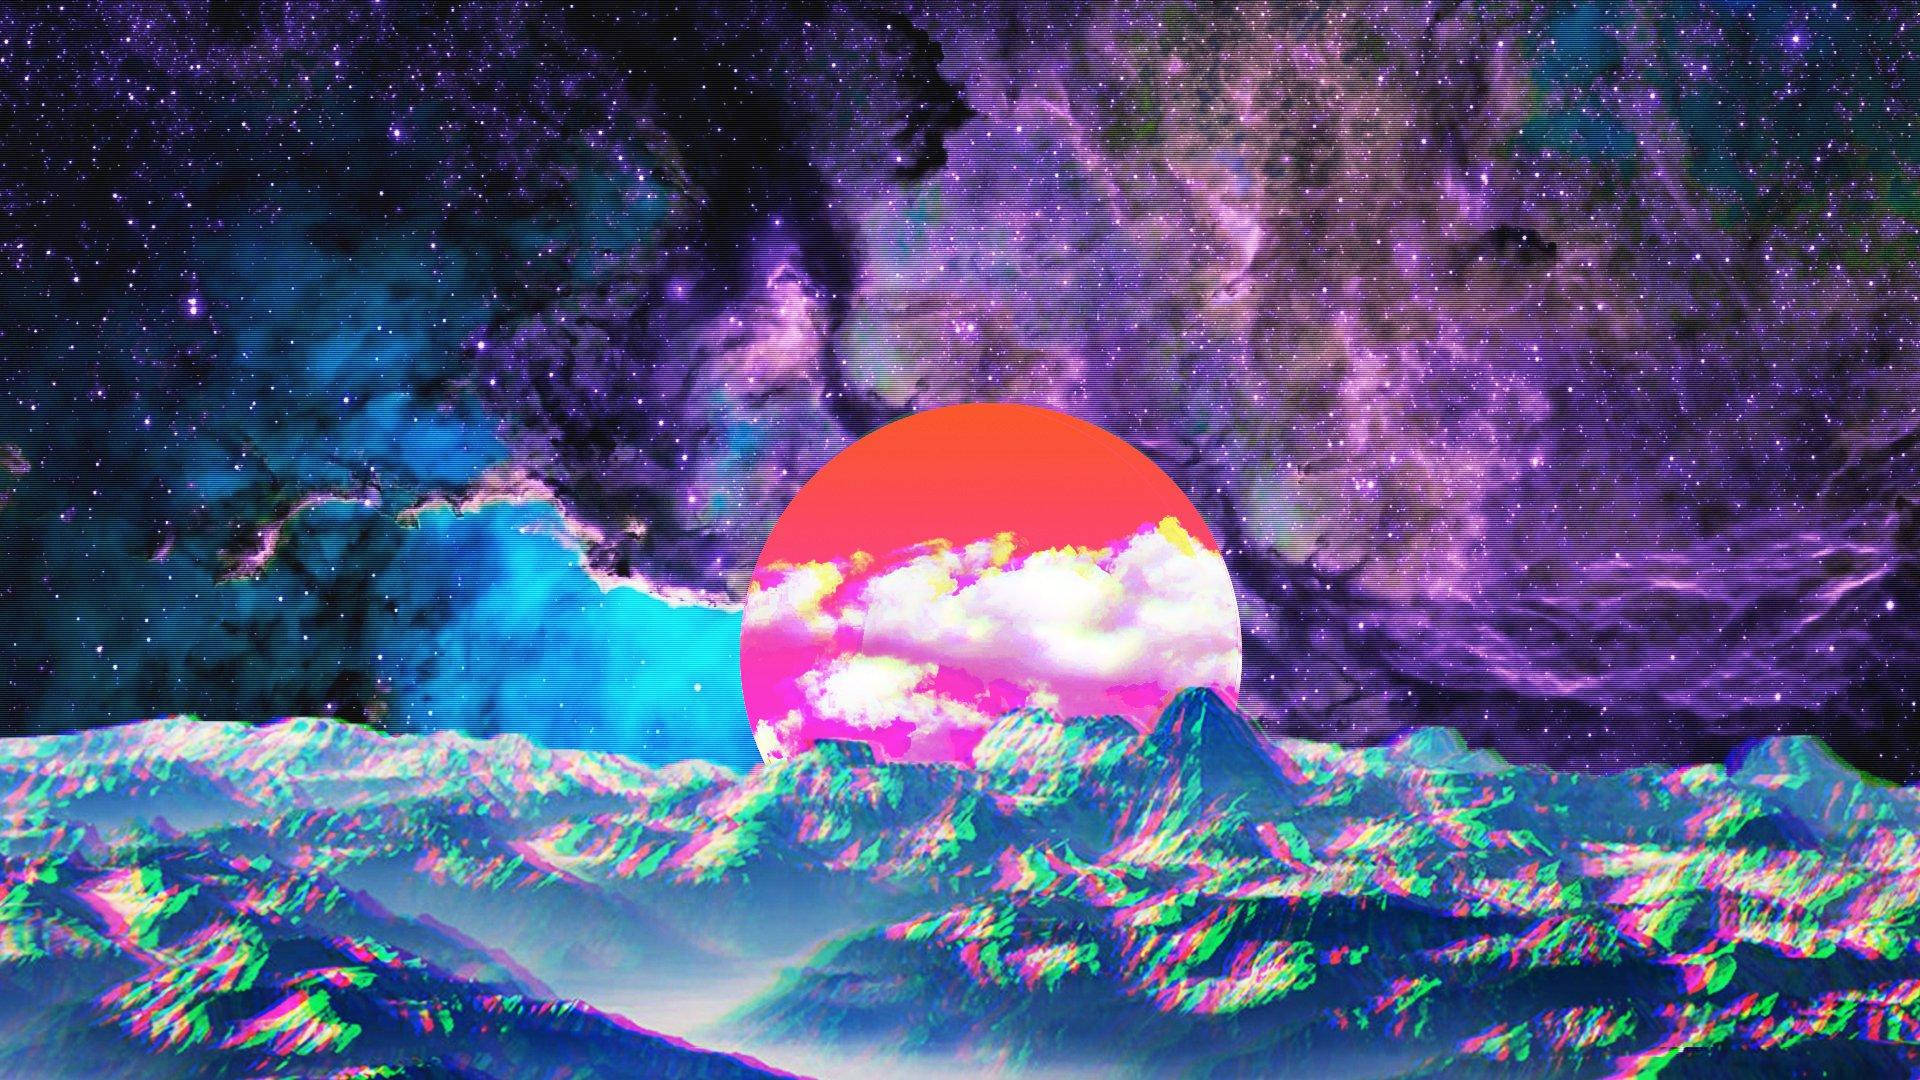 Glitchy Mountain And Galactic Universe Cover Wallpaper